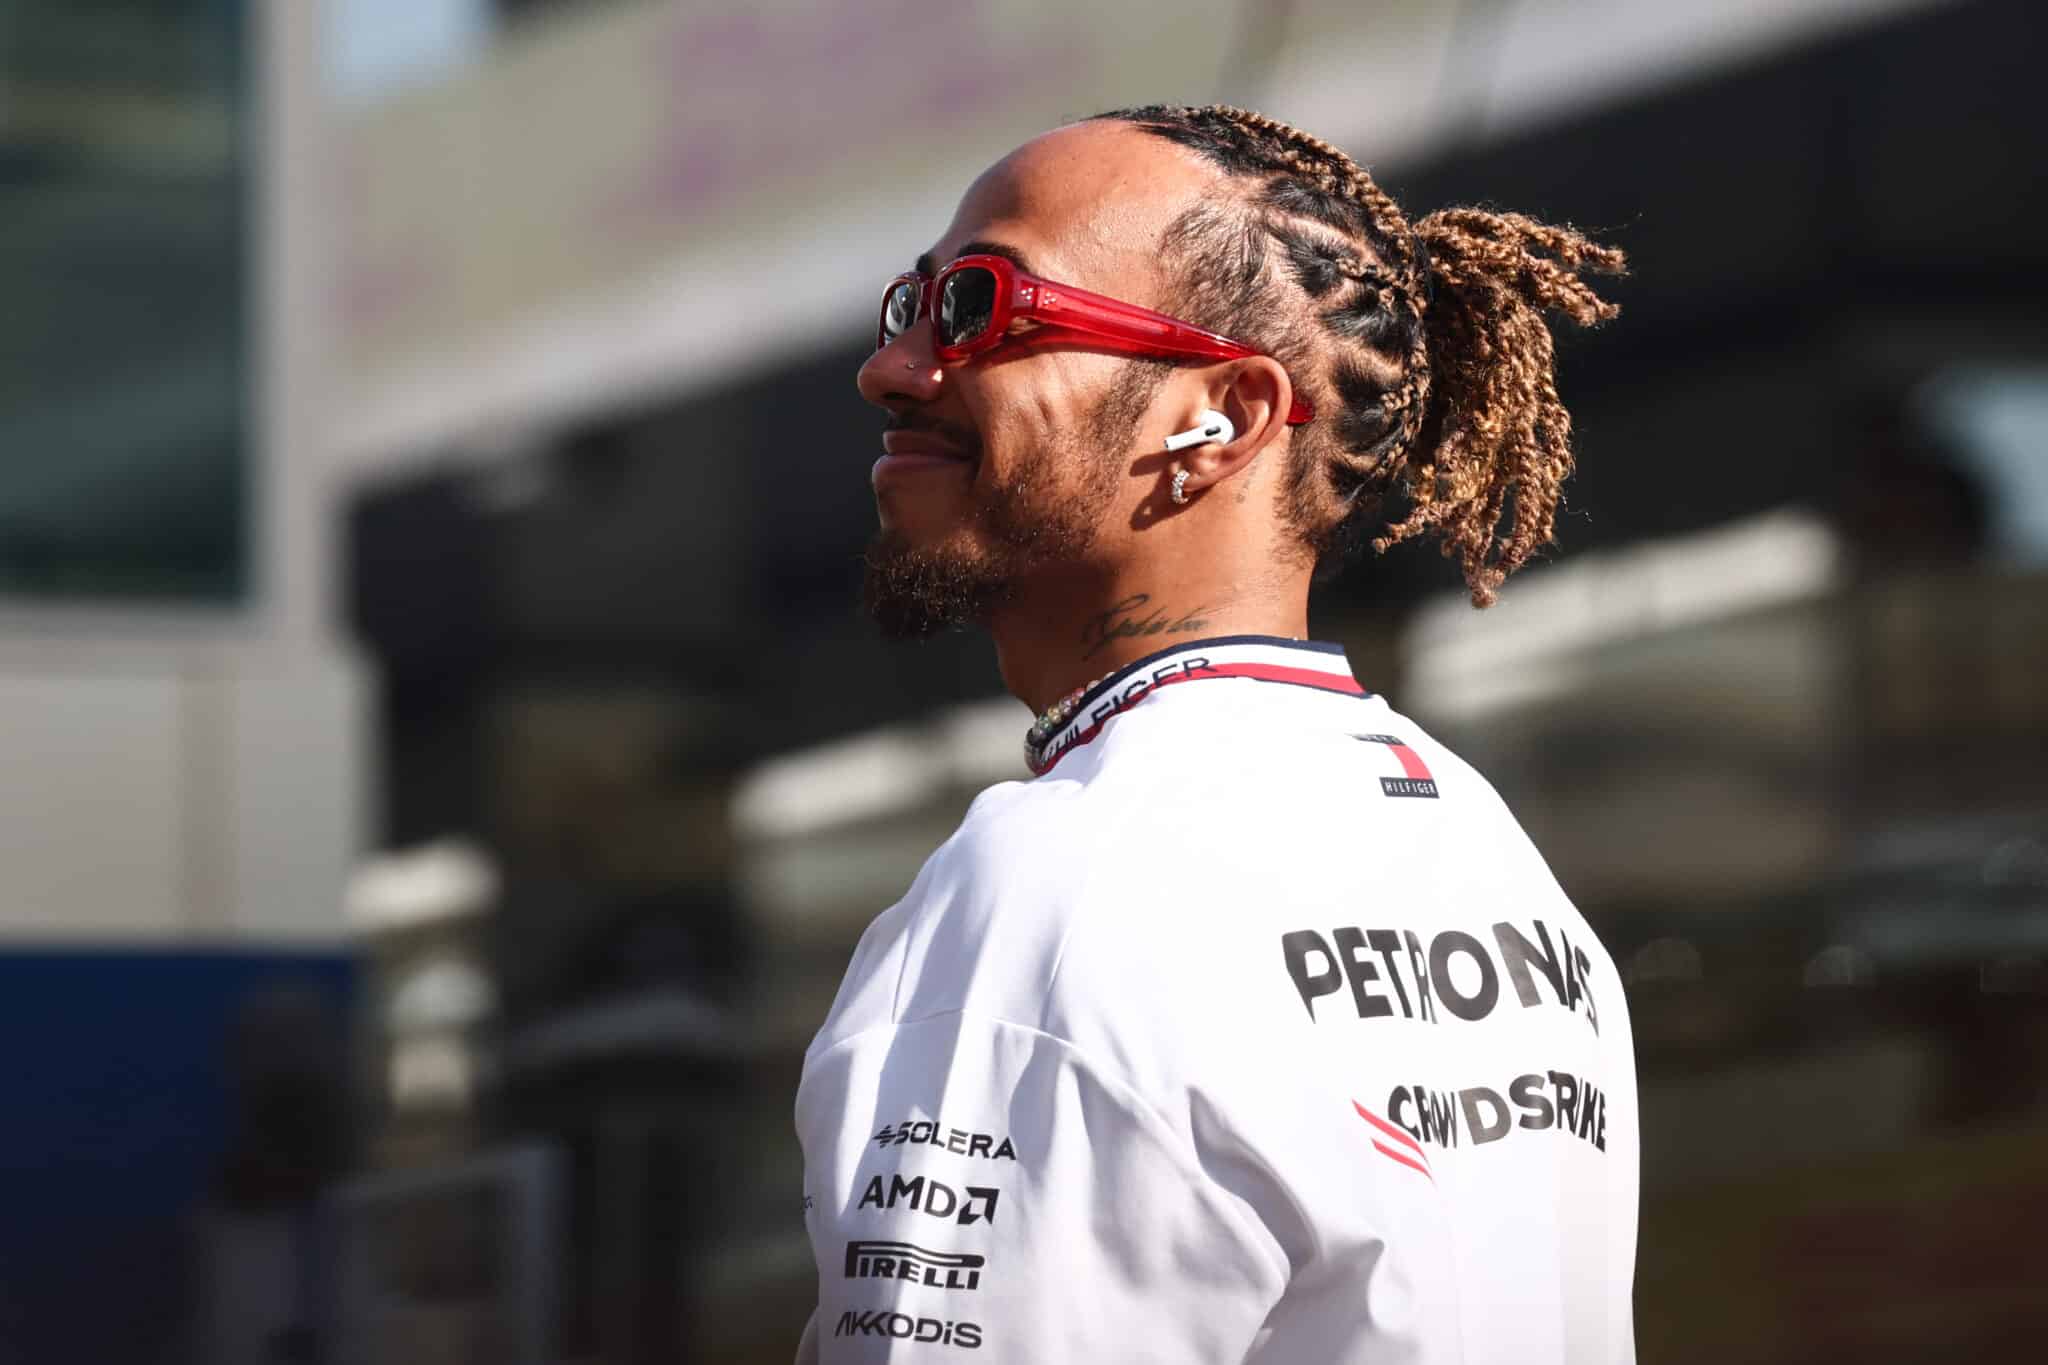 Formula 1 star Lewis Hamilton to leave Mercedes and join Ferrari in shock move: Reports